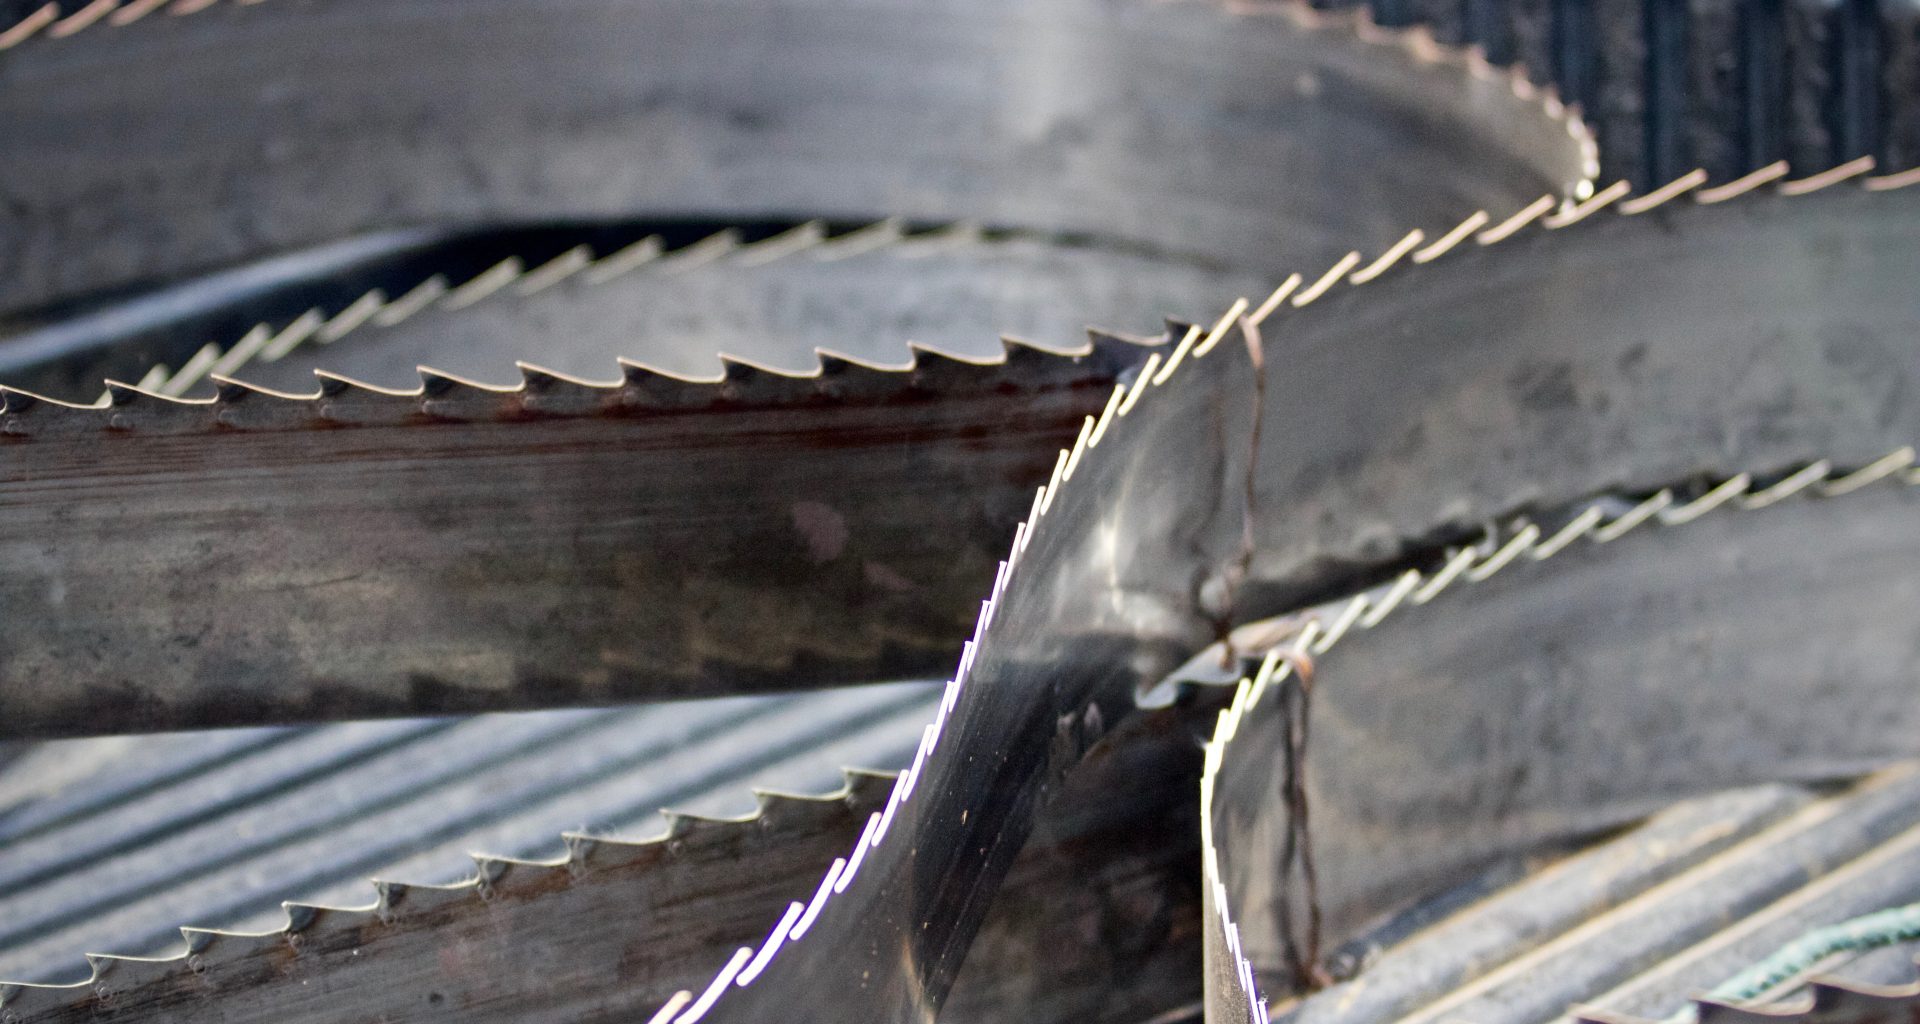 How to change a bandsaw blade